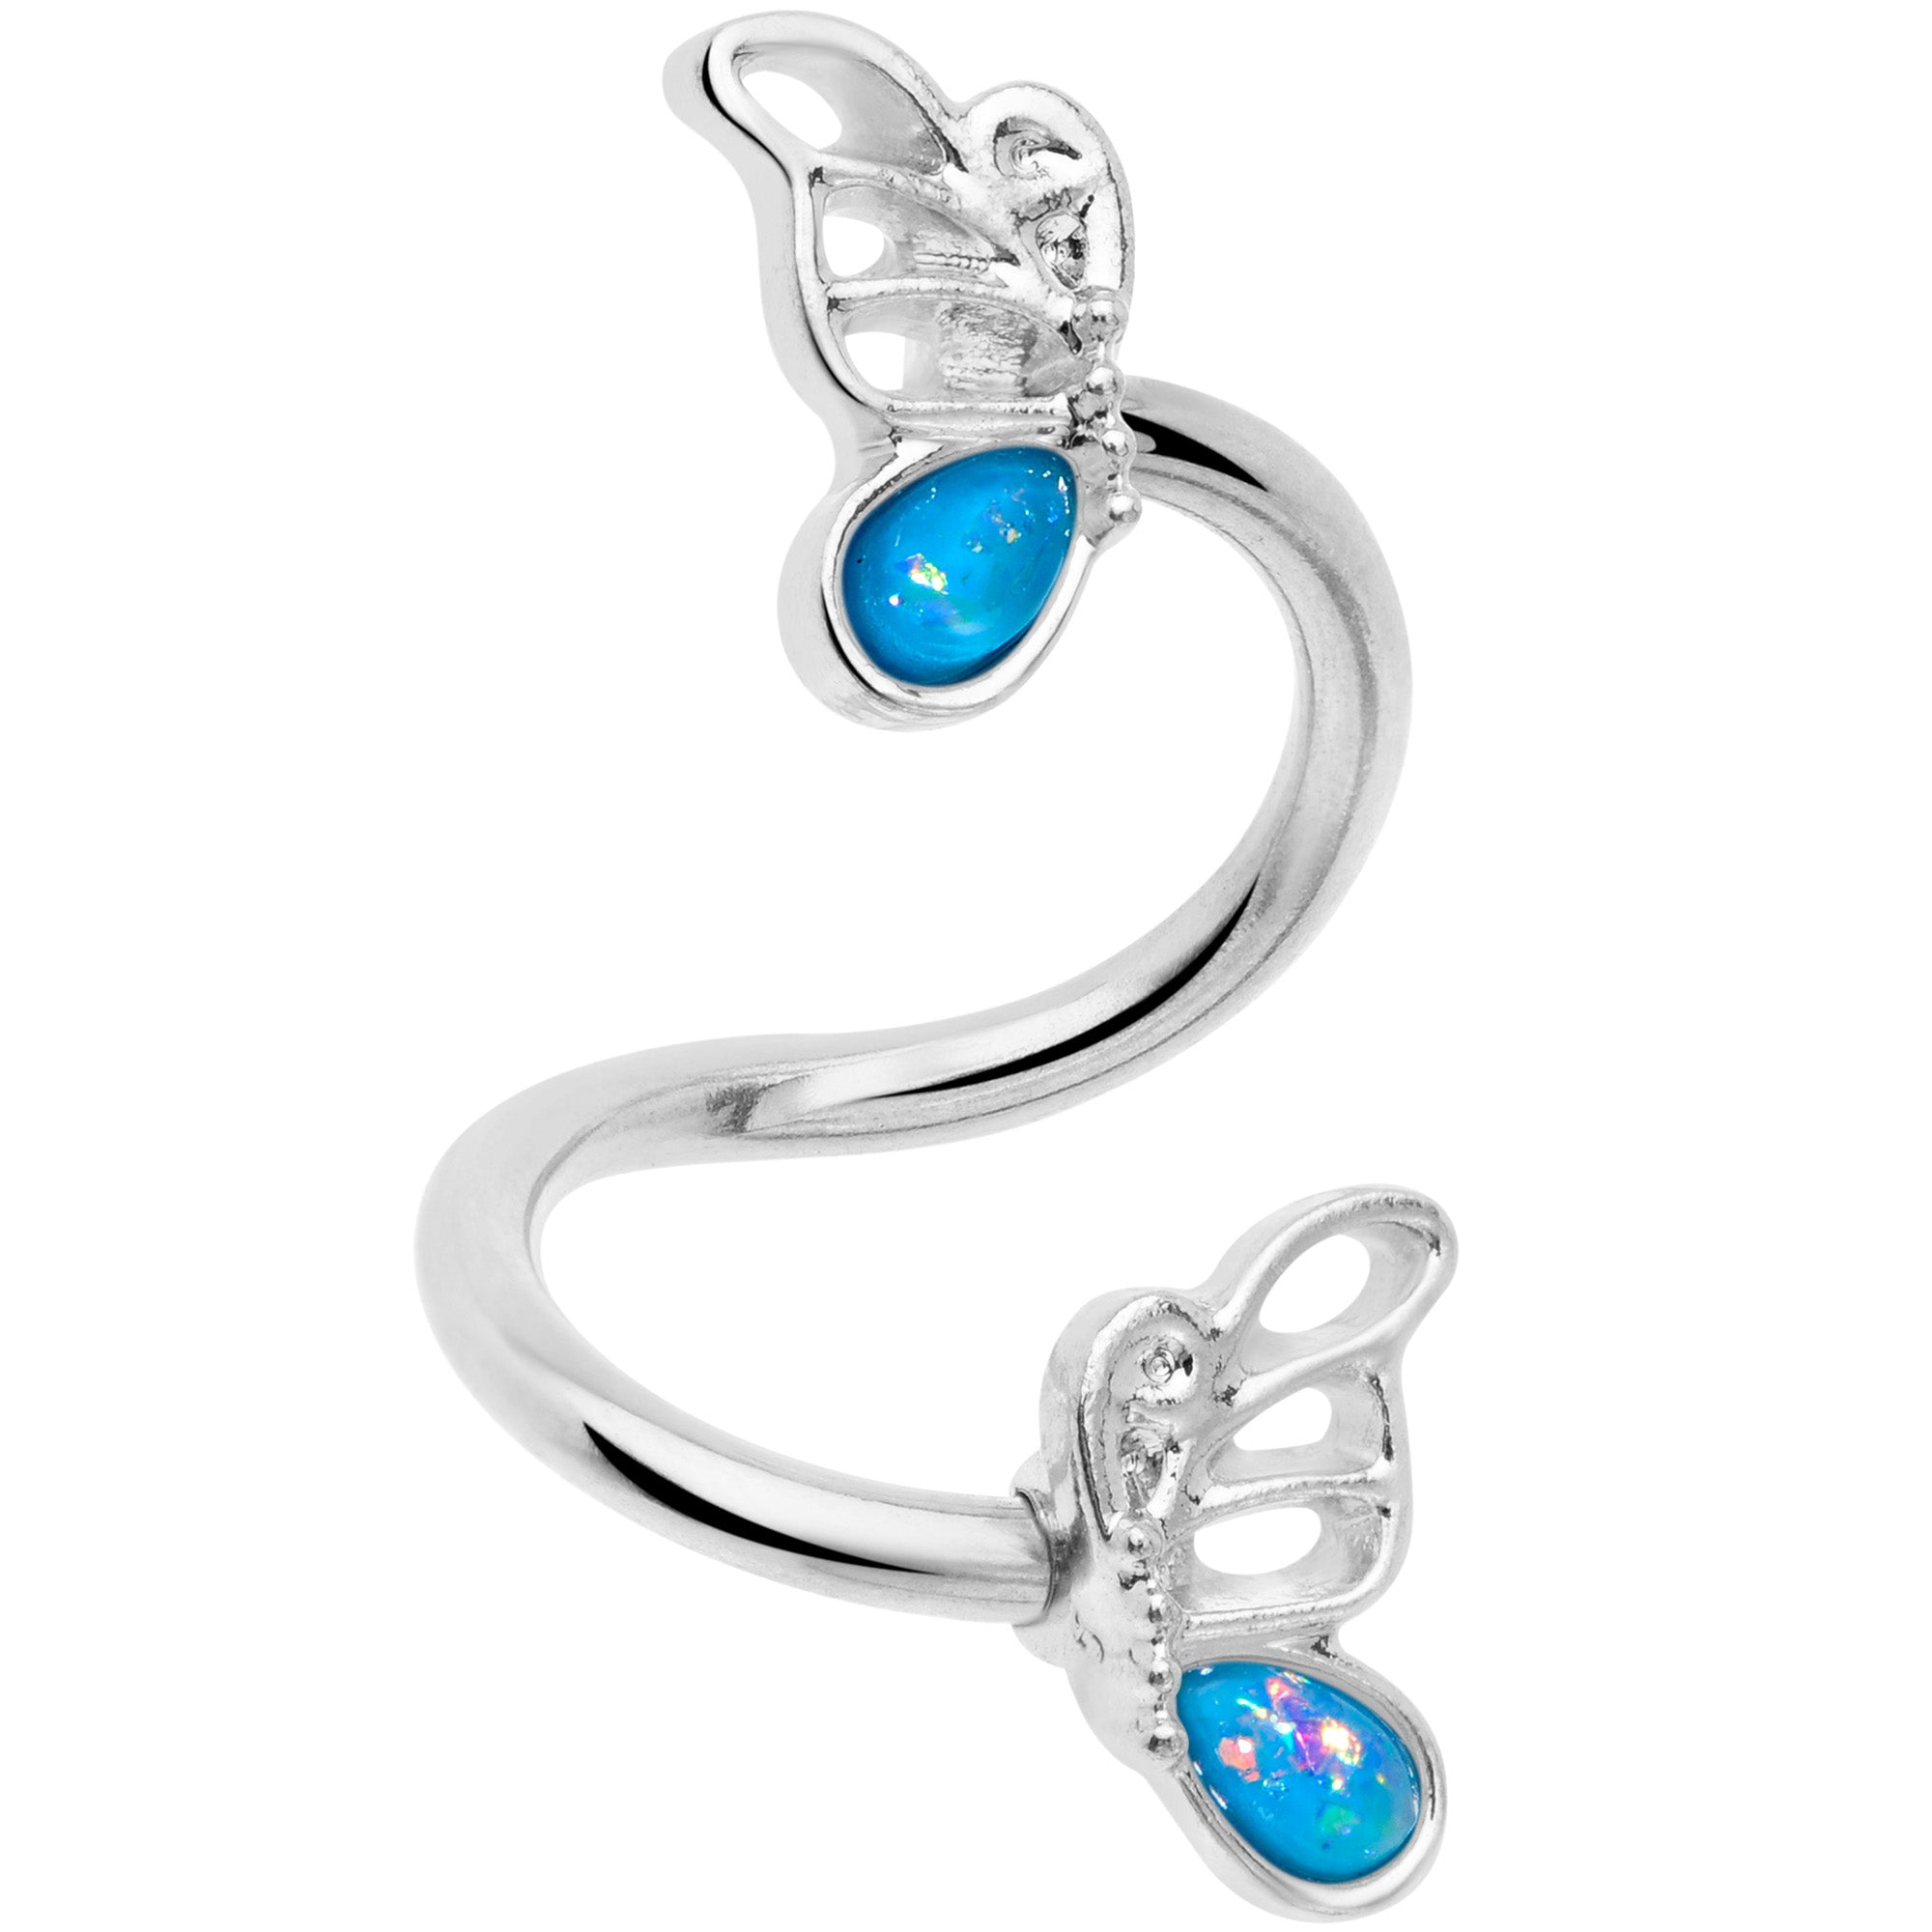 Aqua Faux Opal Butterfly Spiral Twister Belly Ring